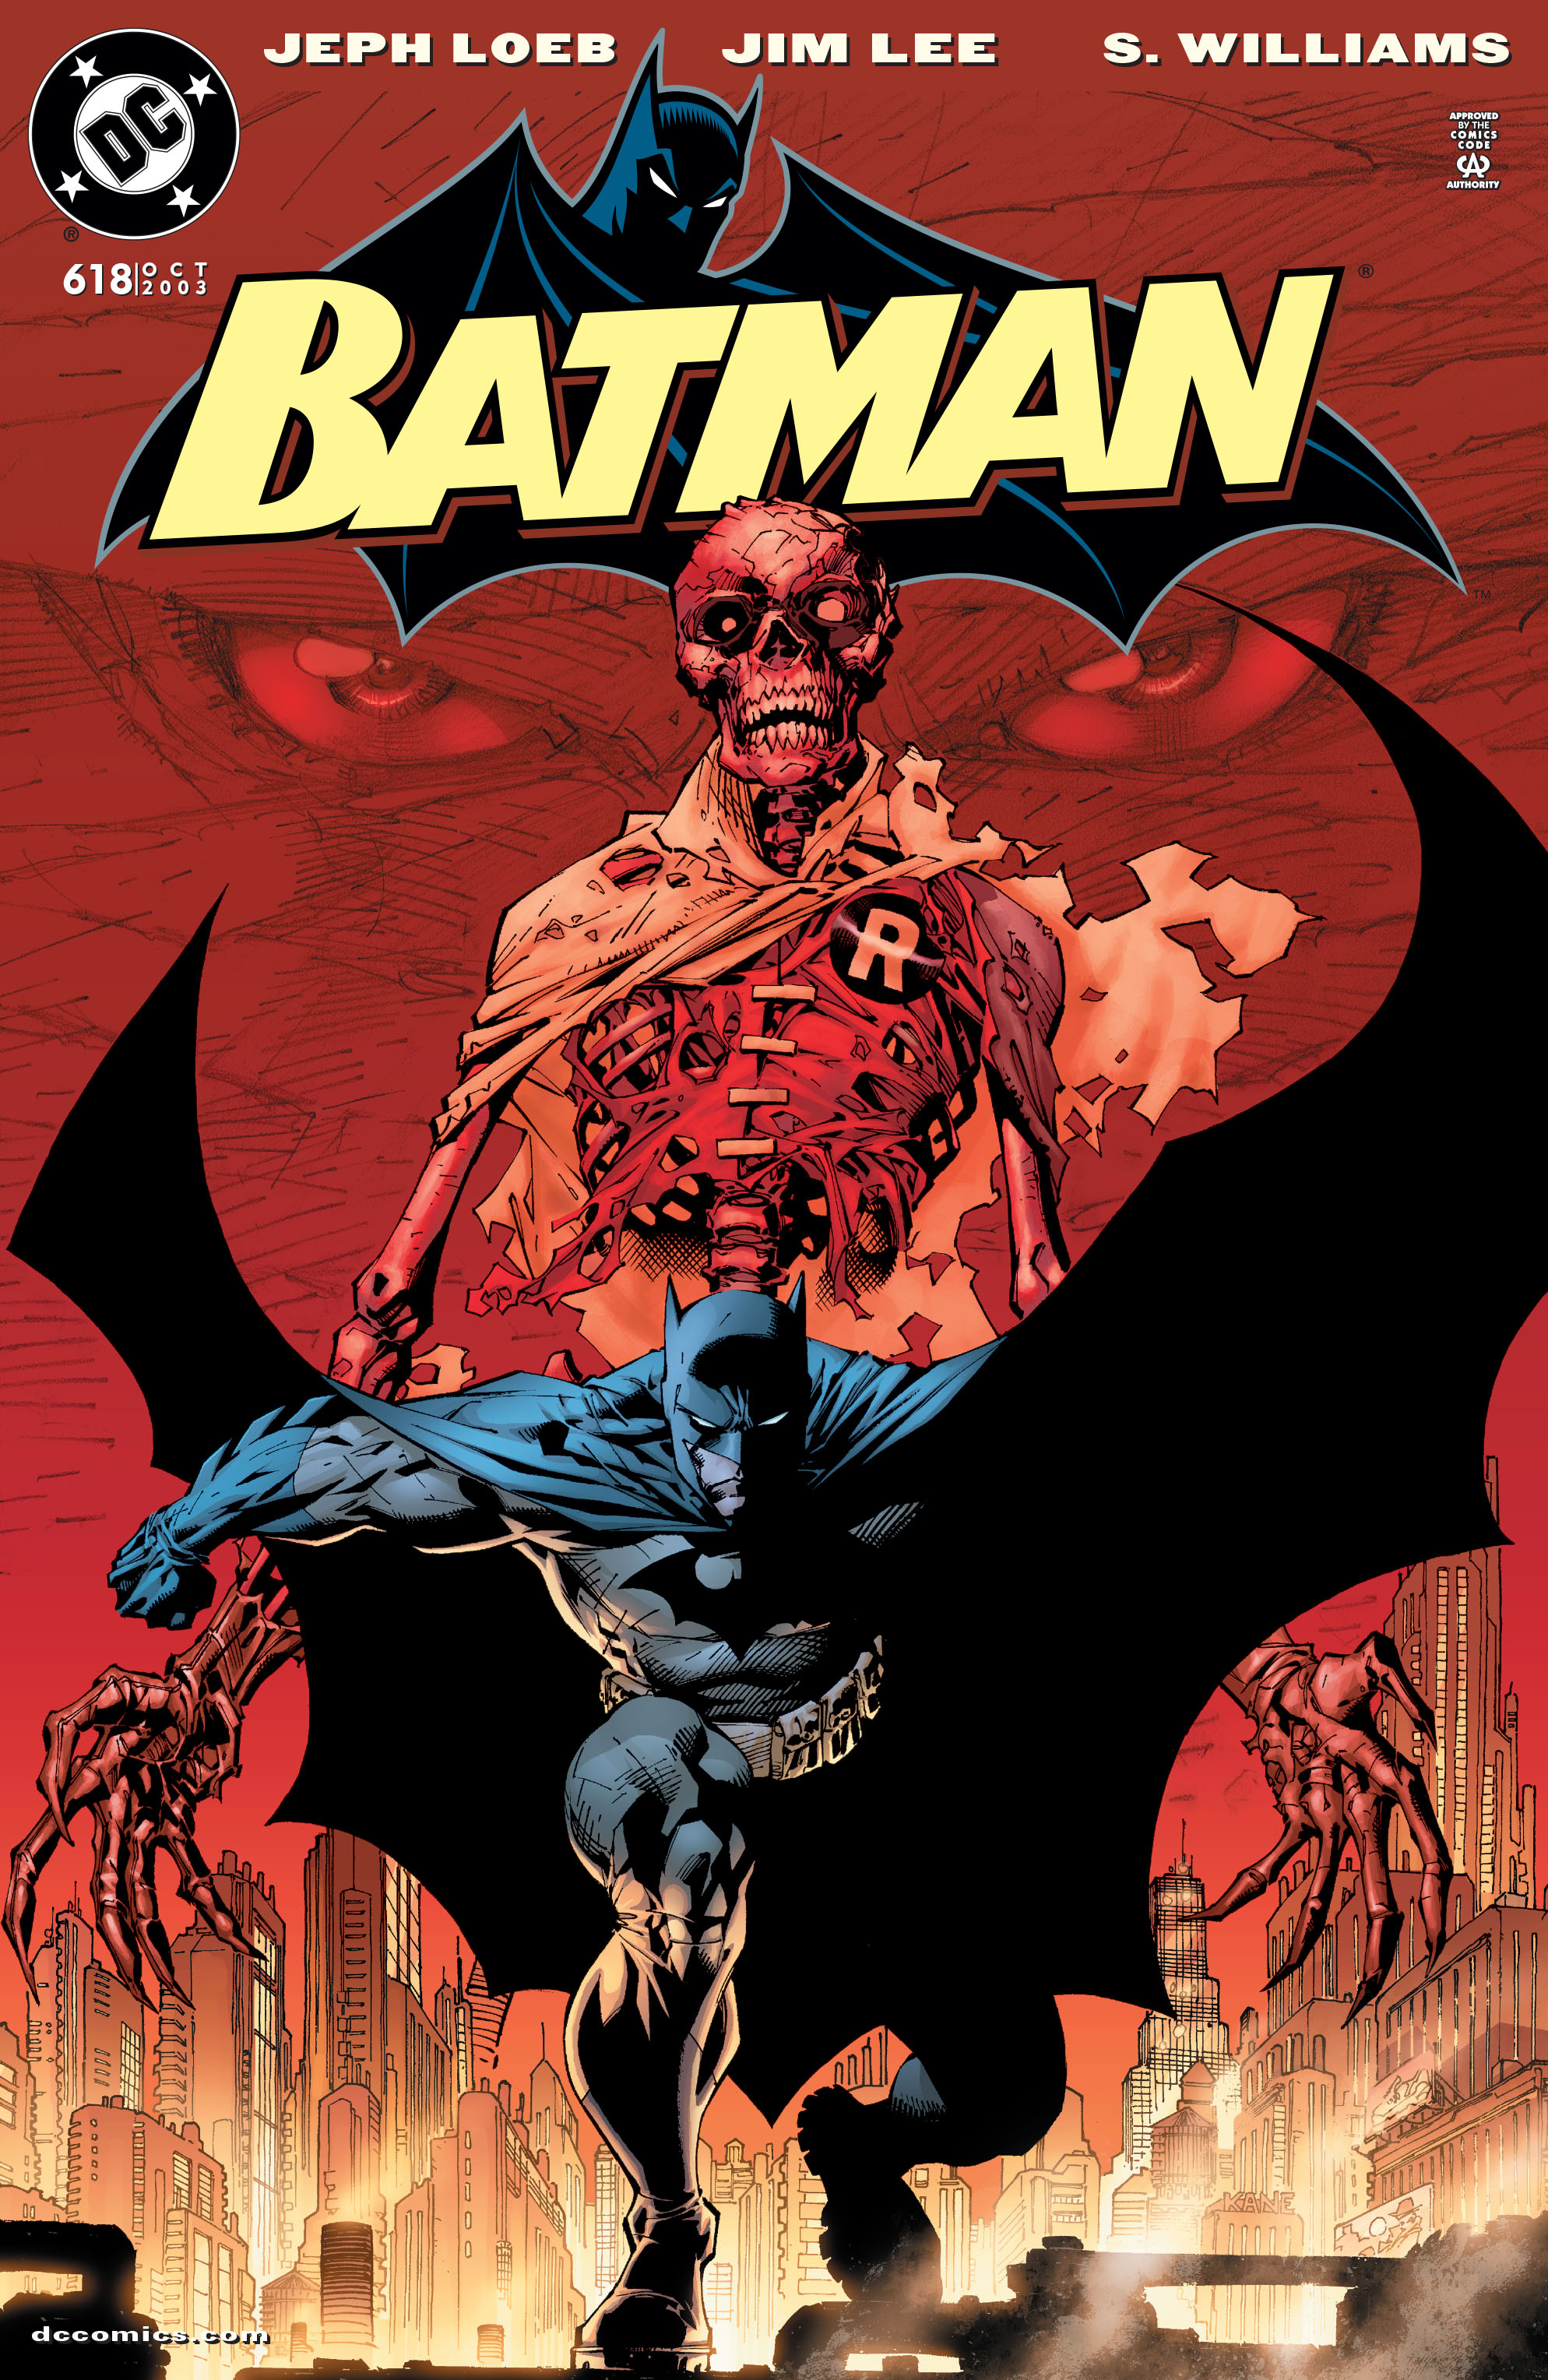 Batman 1940 Issue 618 | Read Batman 1940 Issue 618 comic online in high  quality. Read Full Comic online for free - Read comics online in high  quality .|